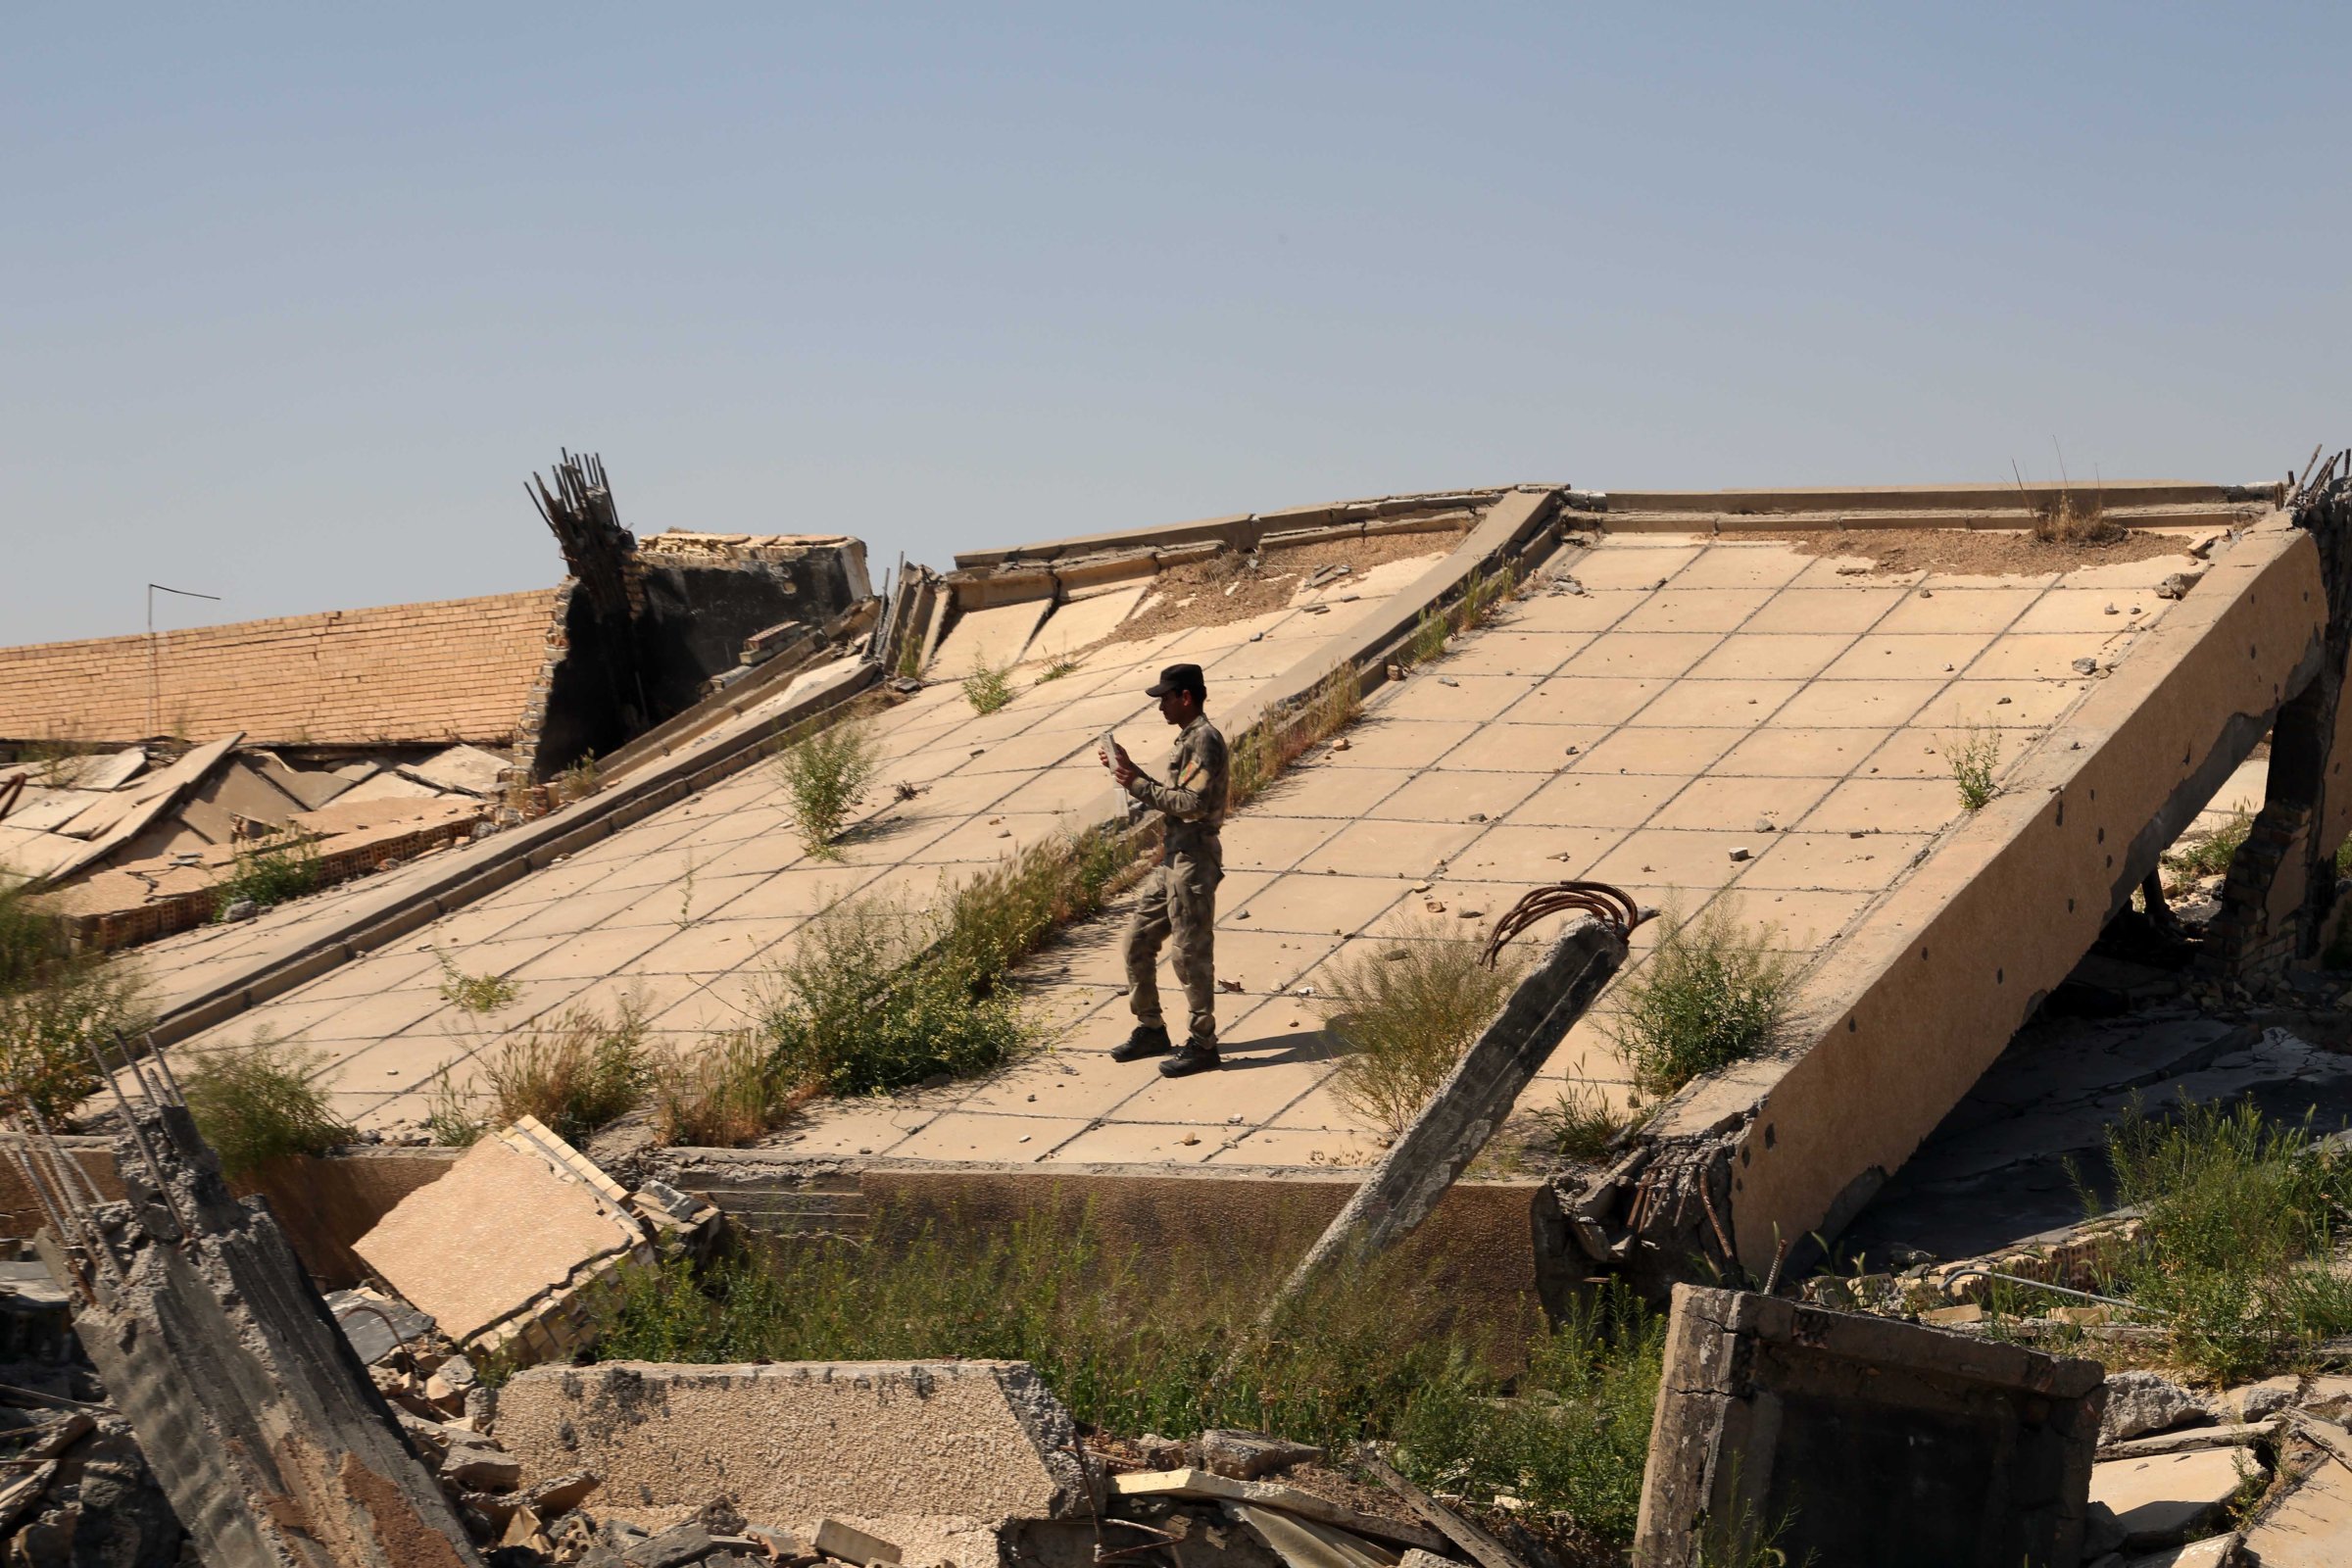 An Iraqi soldier takes photos of the demolished tomb of former Iraqi president, Saddam Hussein, in Tikrit, Iraq, March 15, 2015